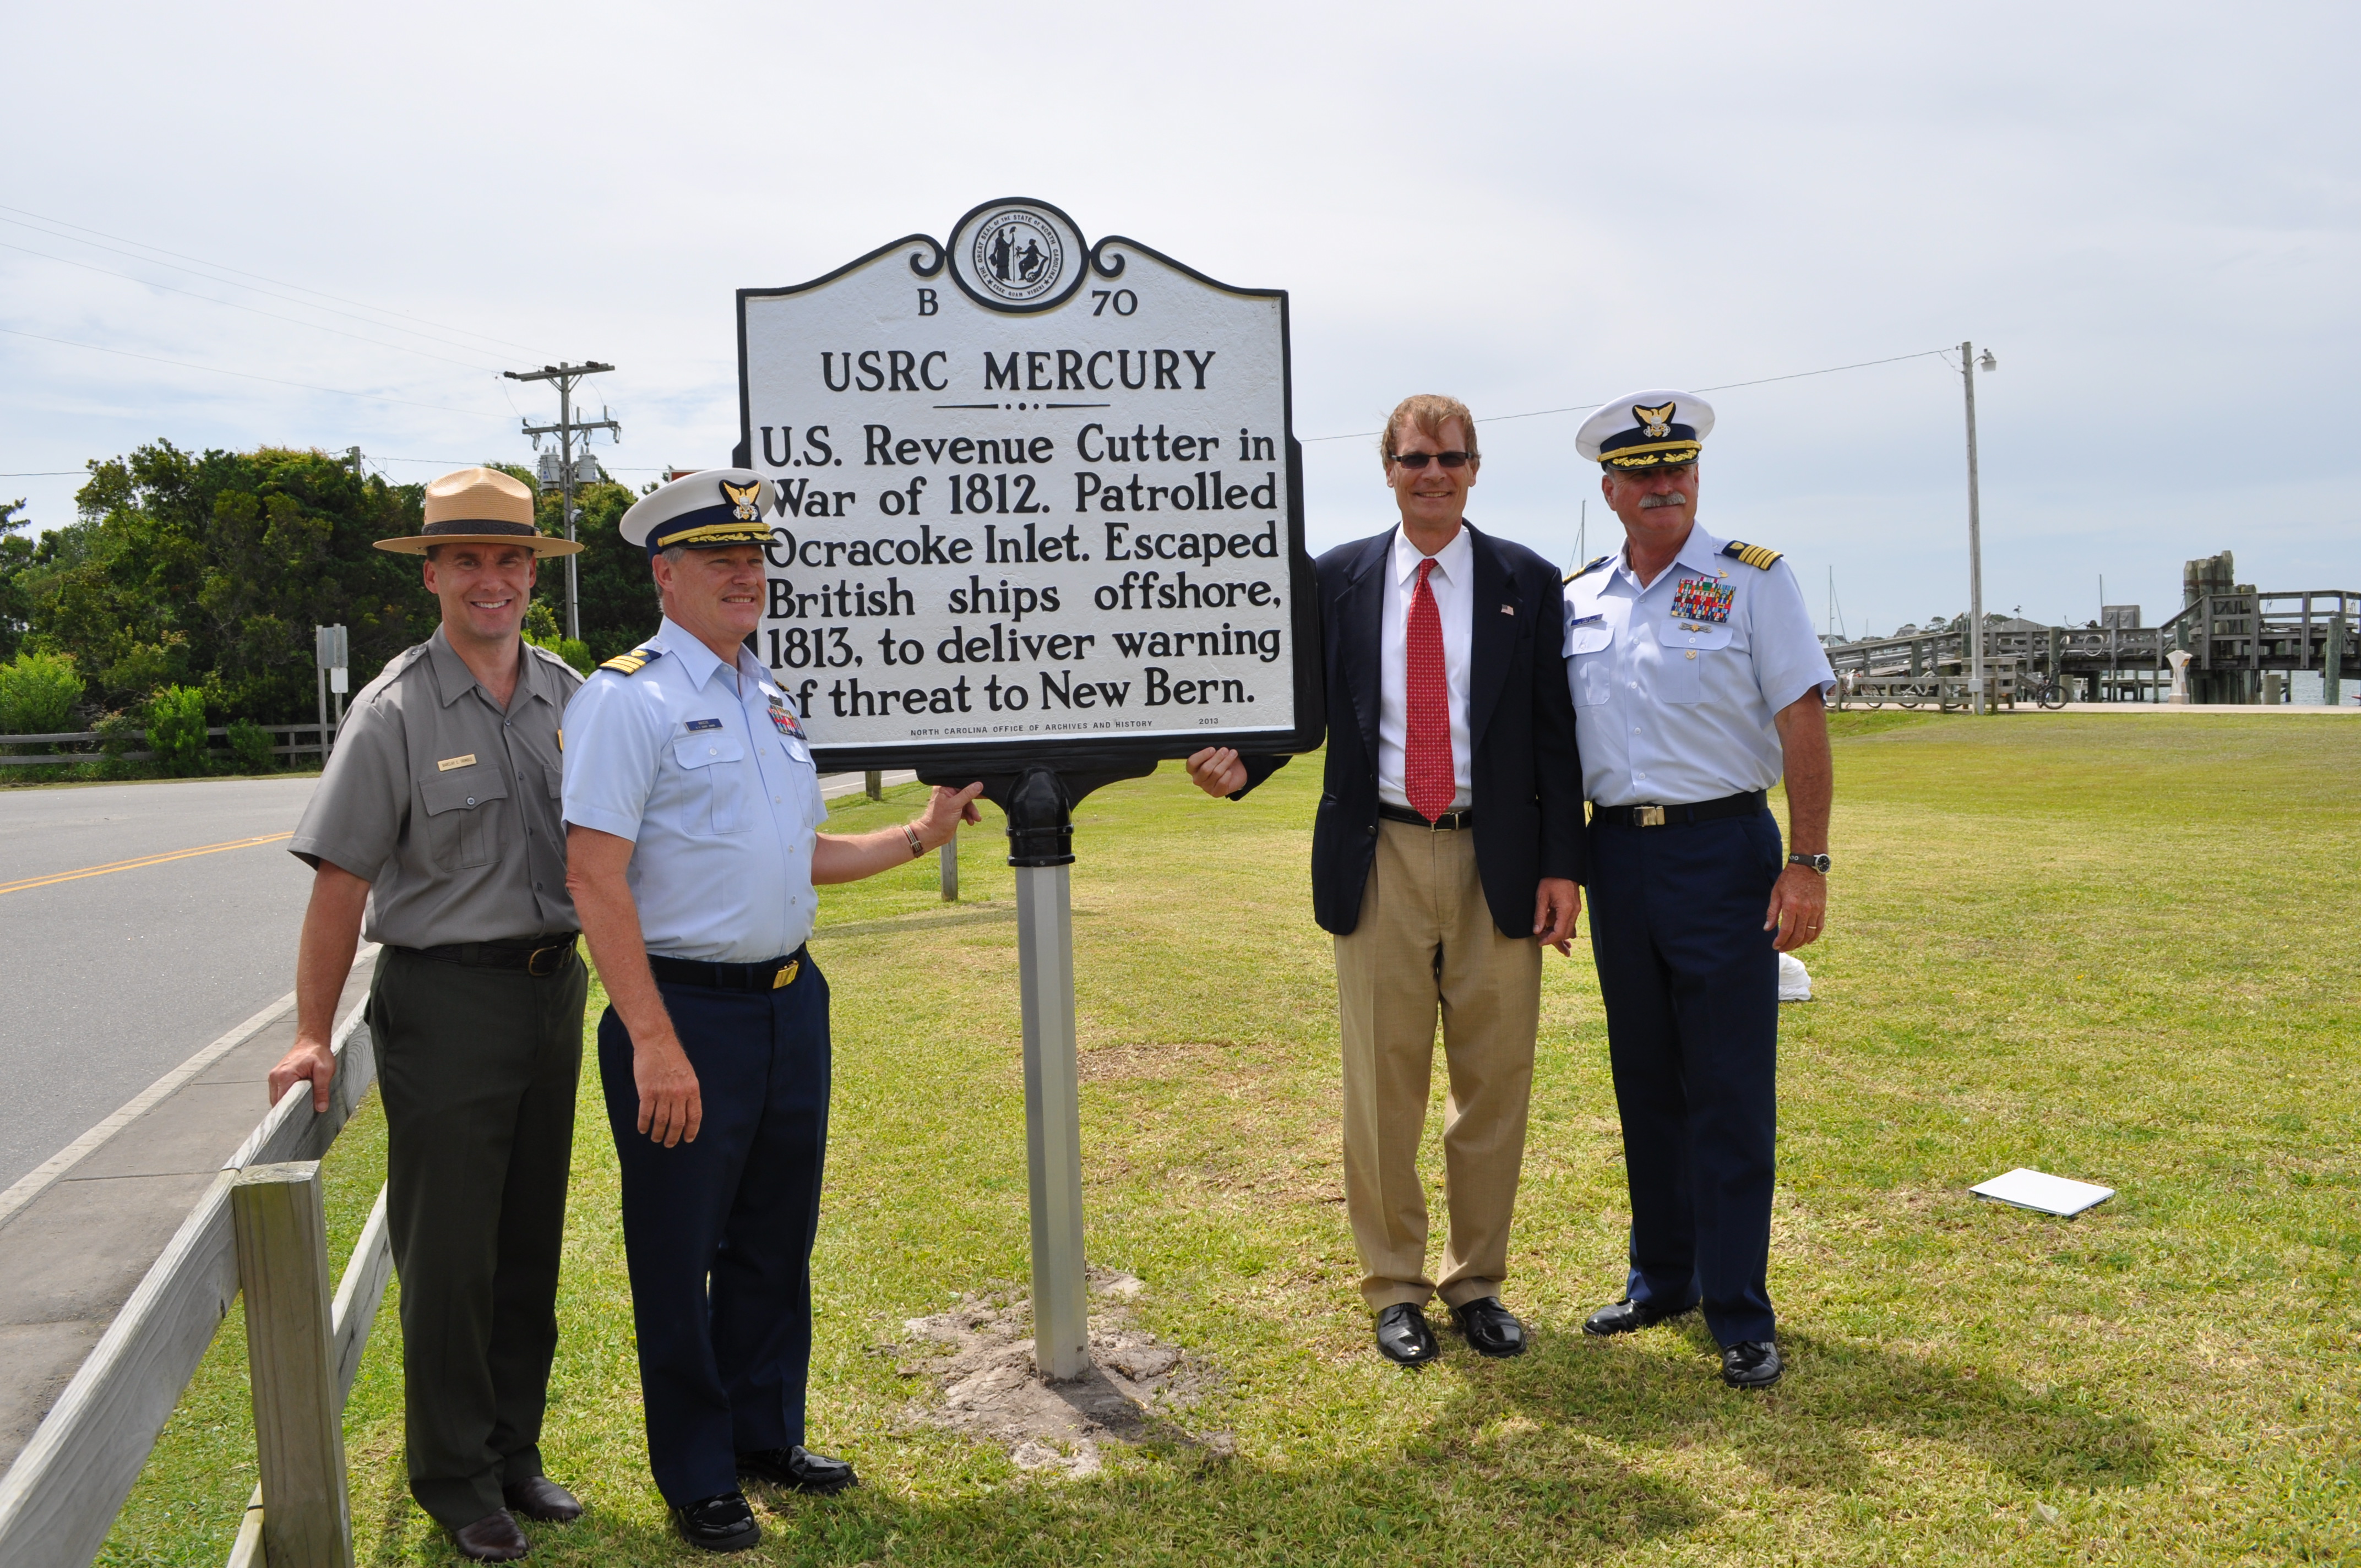 Historical marker located in Ocracoke, N.C. commemorating the vital role played by Revenue Cutter Mercury in the War of 1812. (Coast Guard Collection)